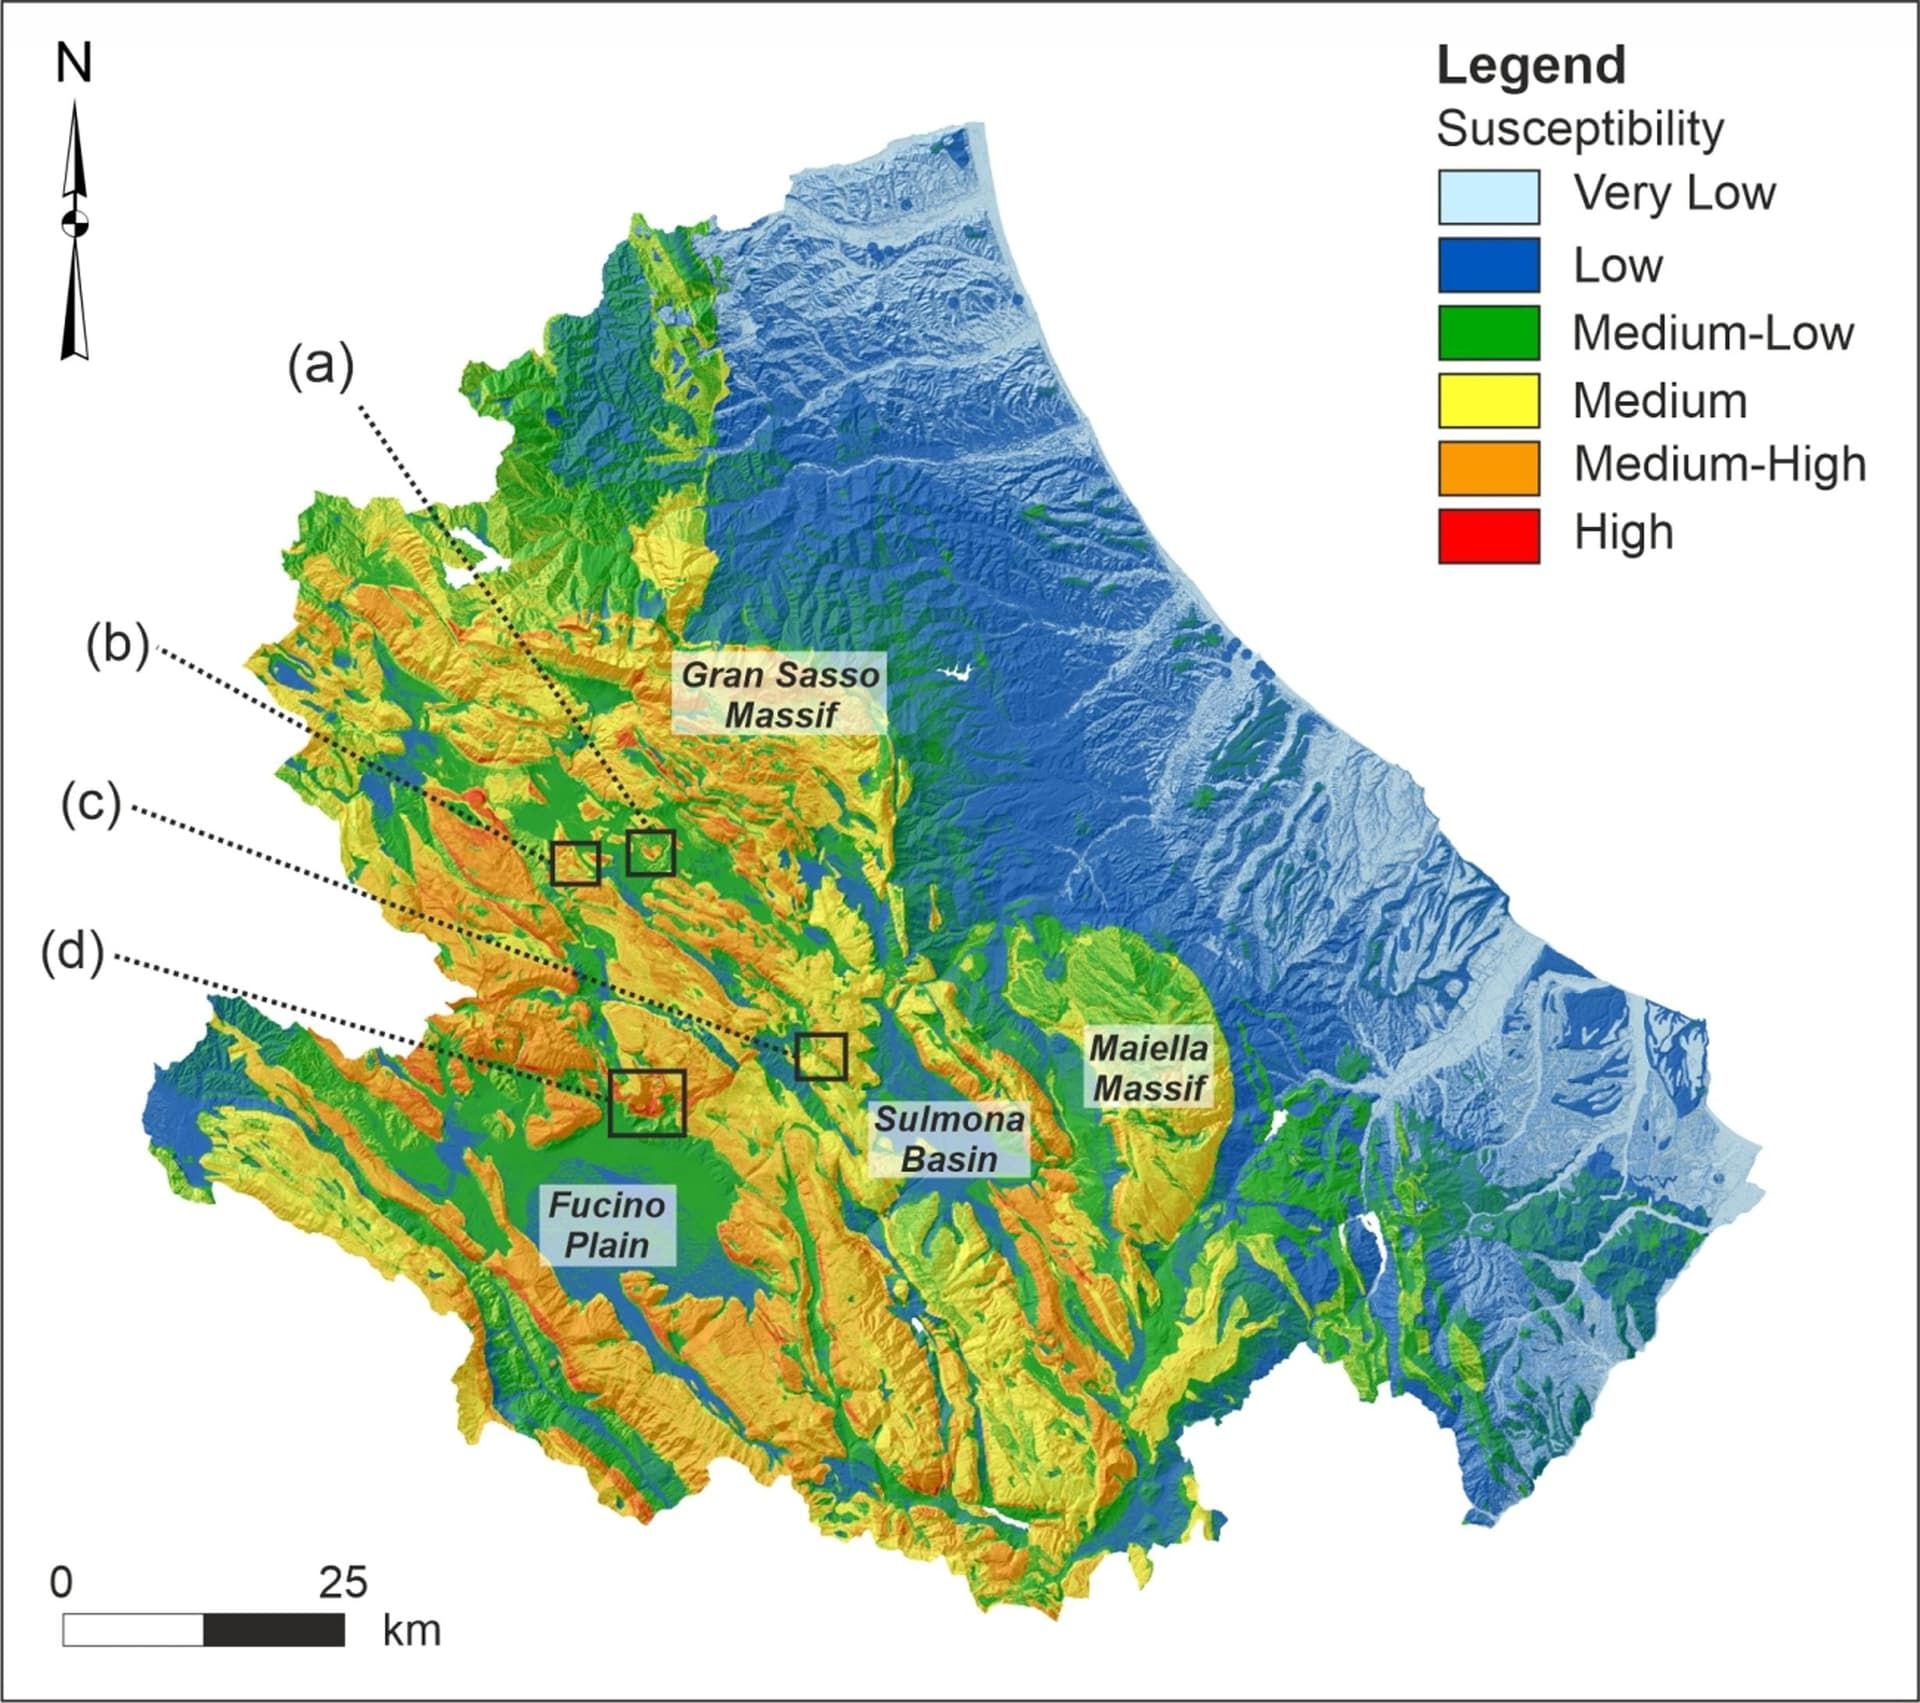 Earthquake-induced landslides susceptibility evaluation: A case study from the Abruzzo region (Central Italy)